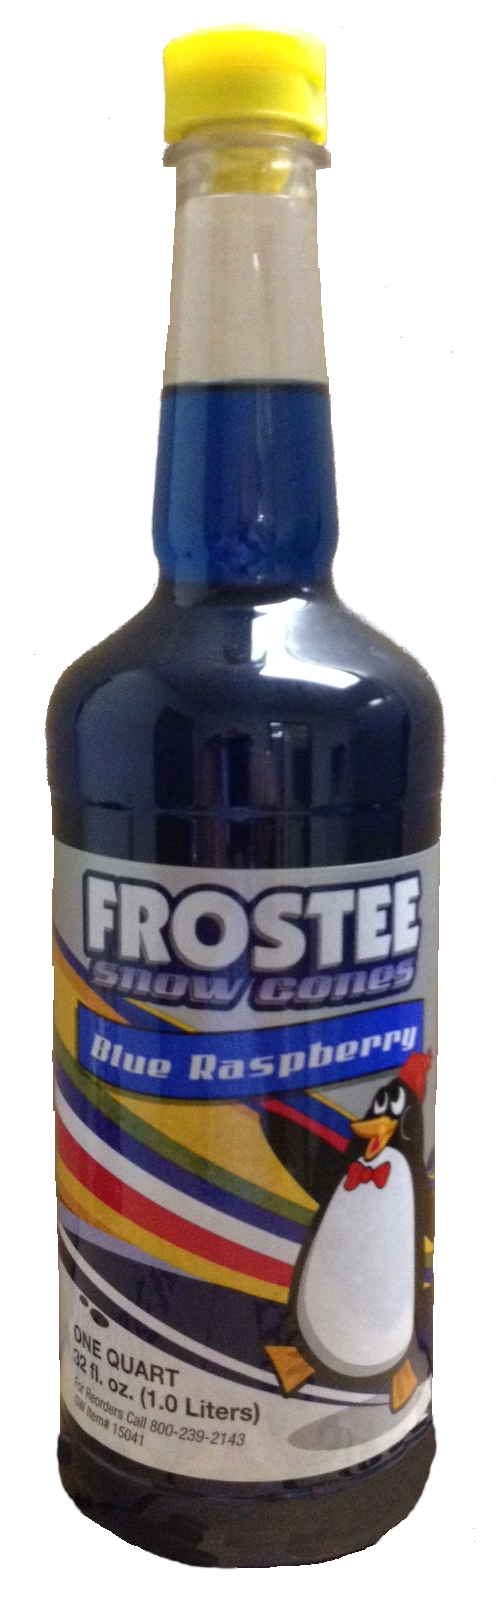 Frostee Snowcone Syrup Blue Raspberry-32 oz.-12/Case